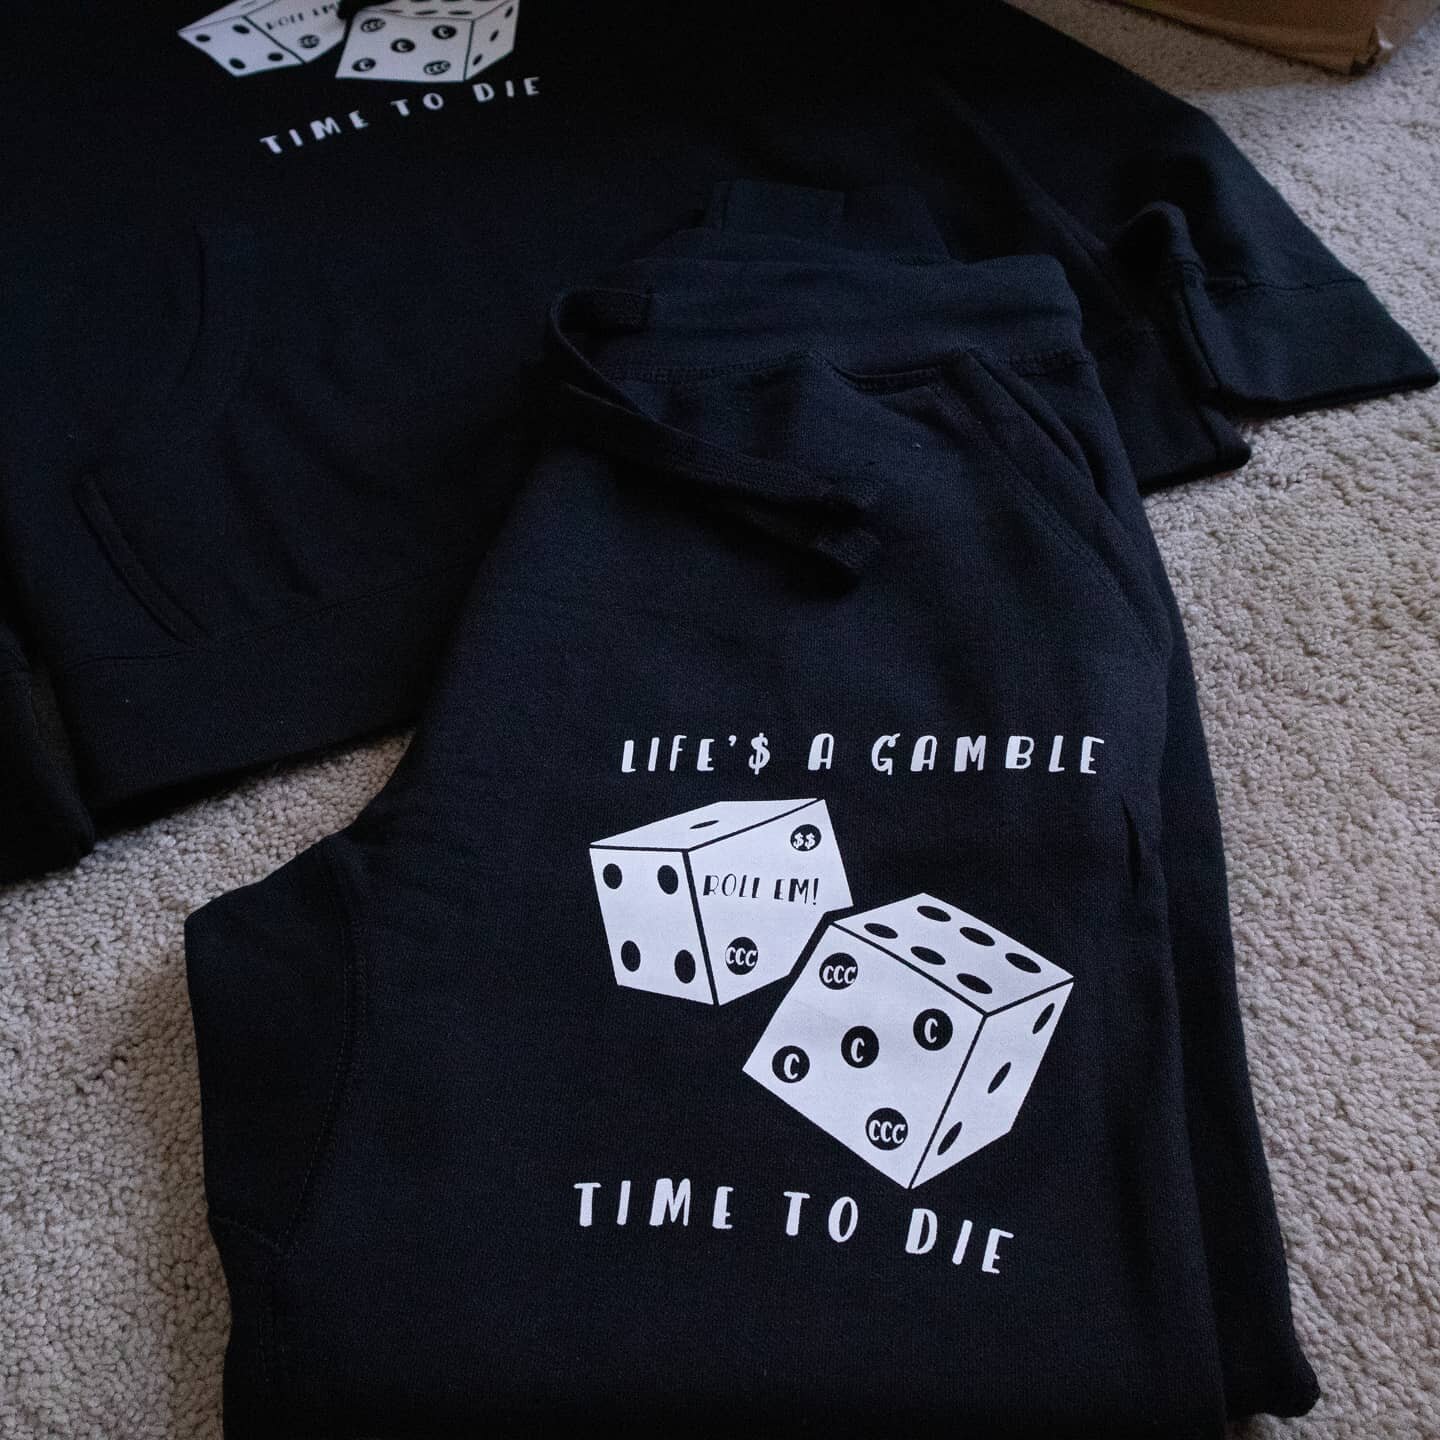 Feeling lucky? Roll the dice in the NEW TTD jogger sweatpants and hoodie set☠🎲☠
.
.
.
.
.
.
 #streetwear #newproducts #ccc #joggers #winter #gamble #shopsmall #virgina #sweatpants #worldwide #blackandwhite #dice #money #riskitforthebiscuit #like4lik